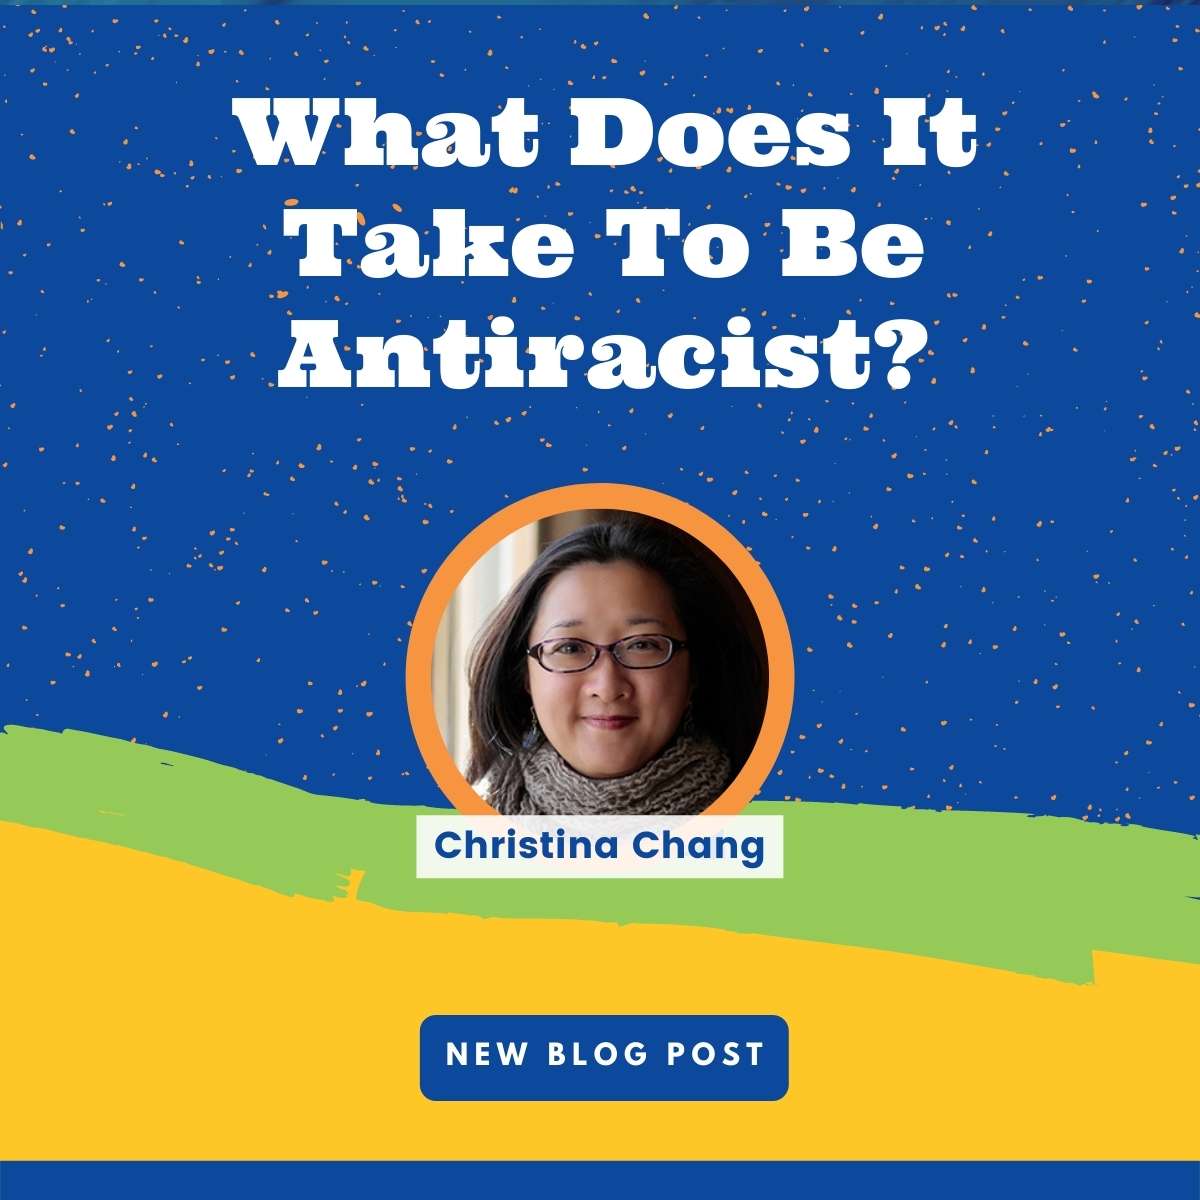 What Does It Take To Be Antiracist?